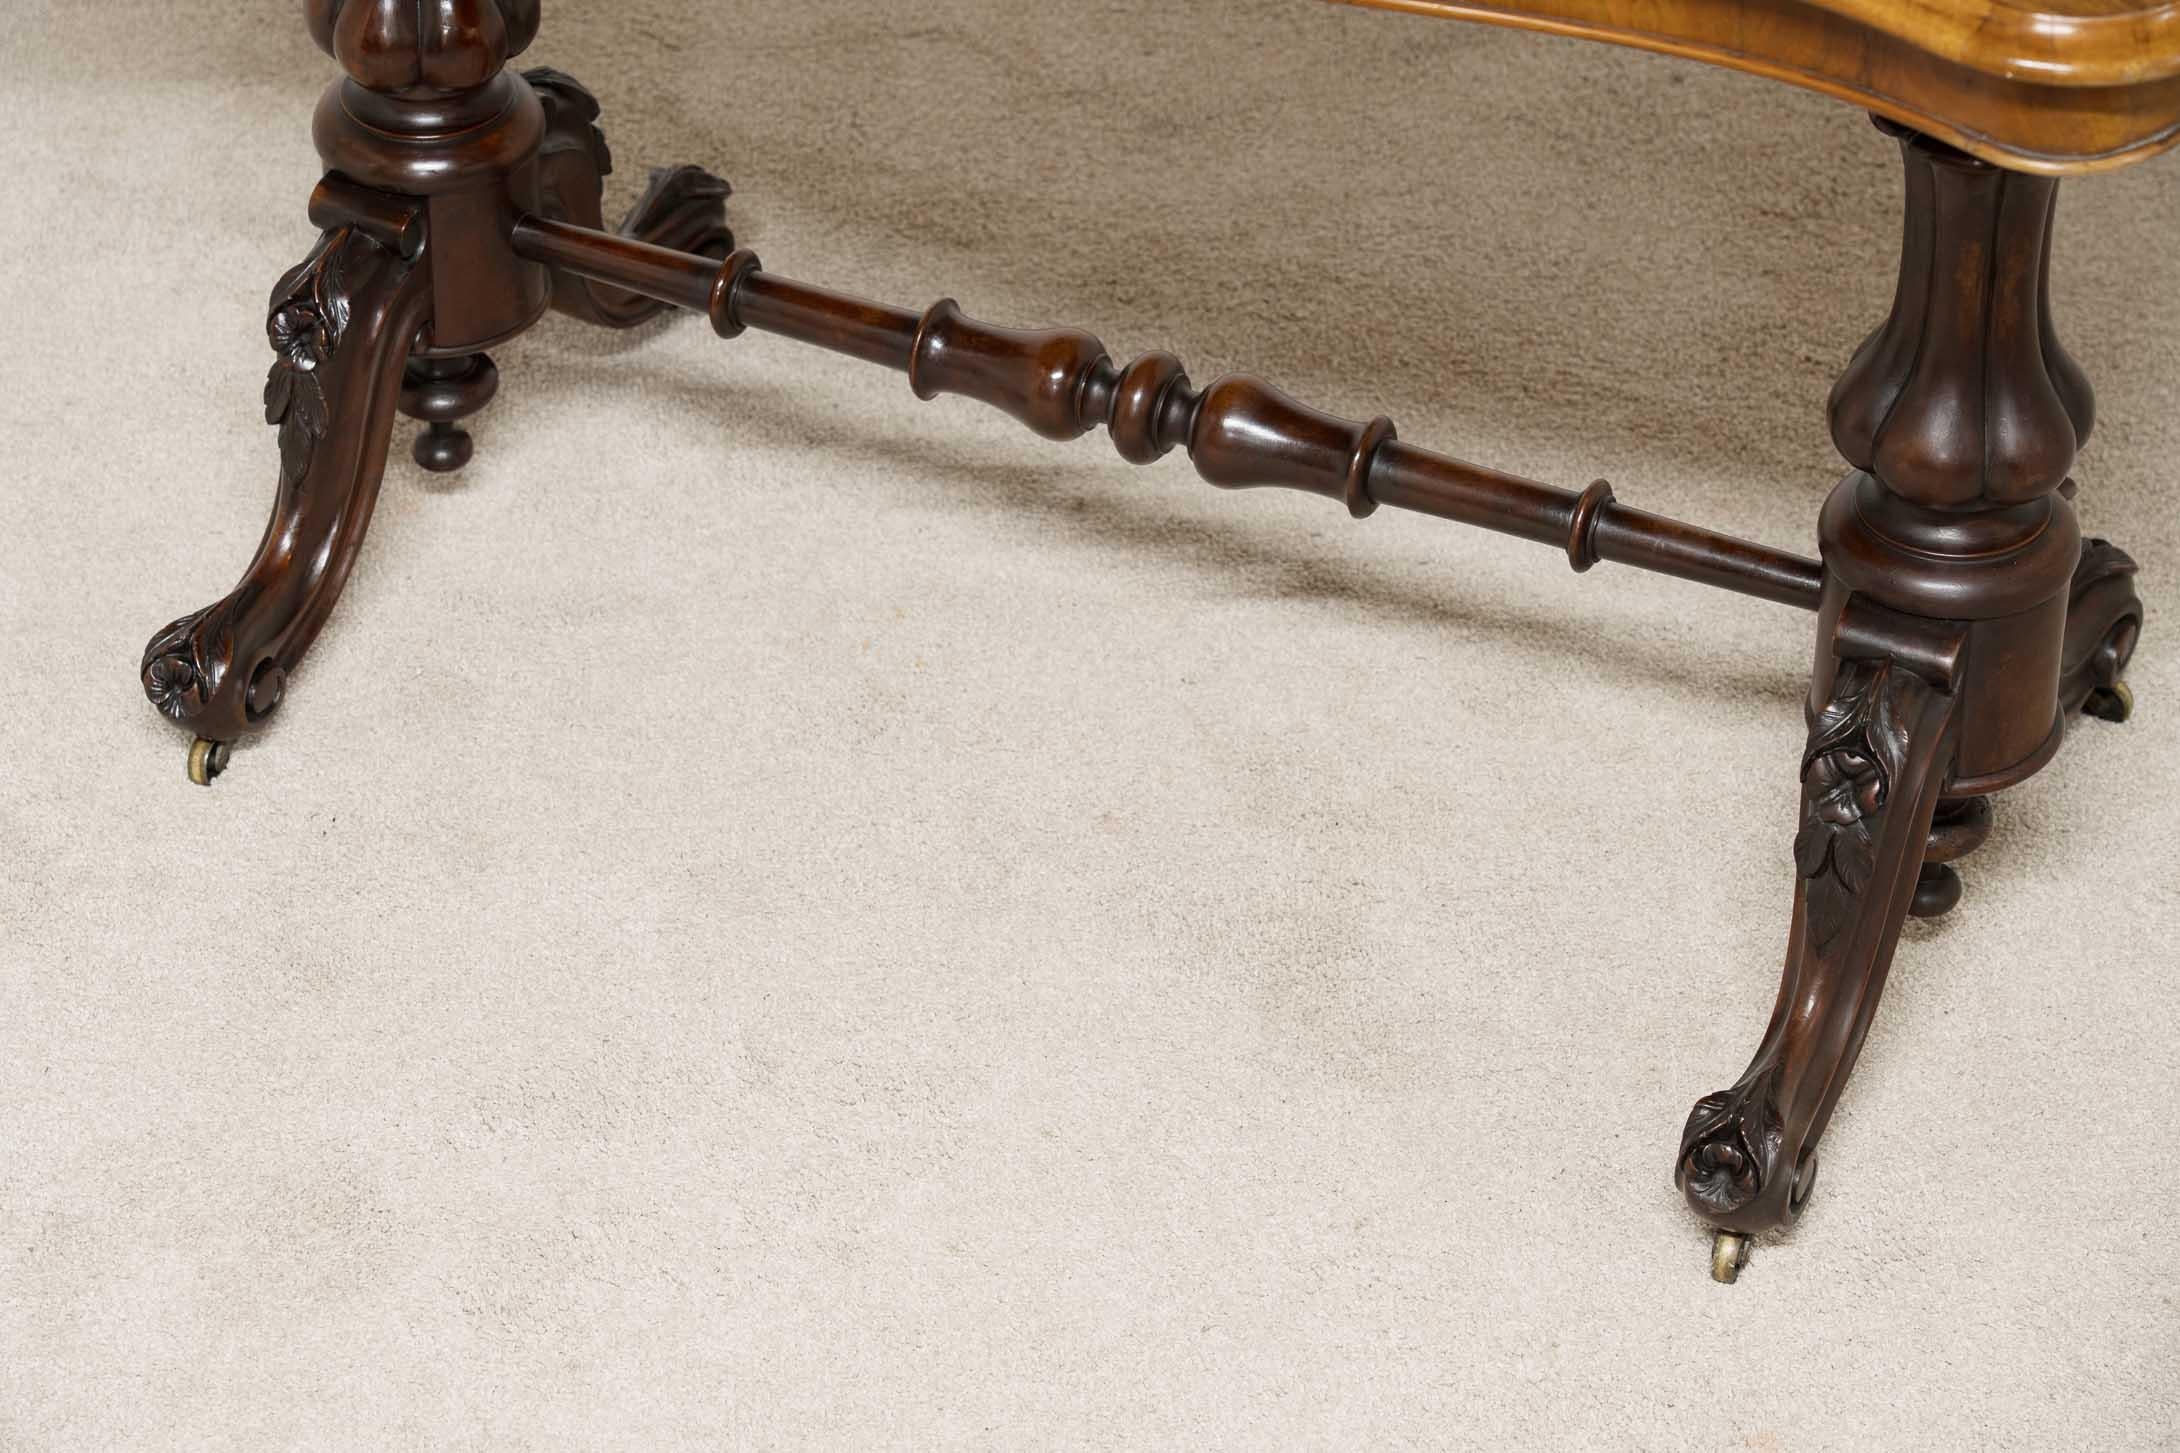 Elegant Victorian stretcher - or side - table
Hand crafted from walnut and we date this to circa 1880
Elegant shape to the table top and carved feet
Look at the sumptuous patina to the burr walnut
Offered in great condition, ready for home use and